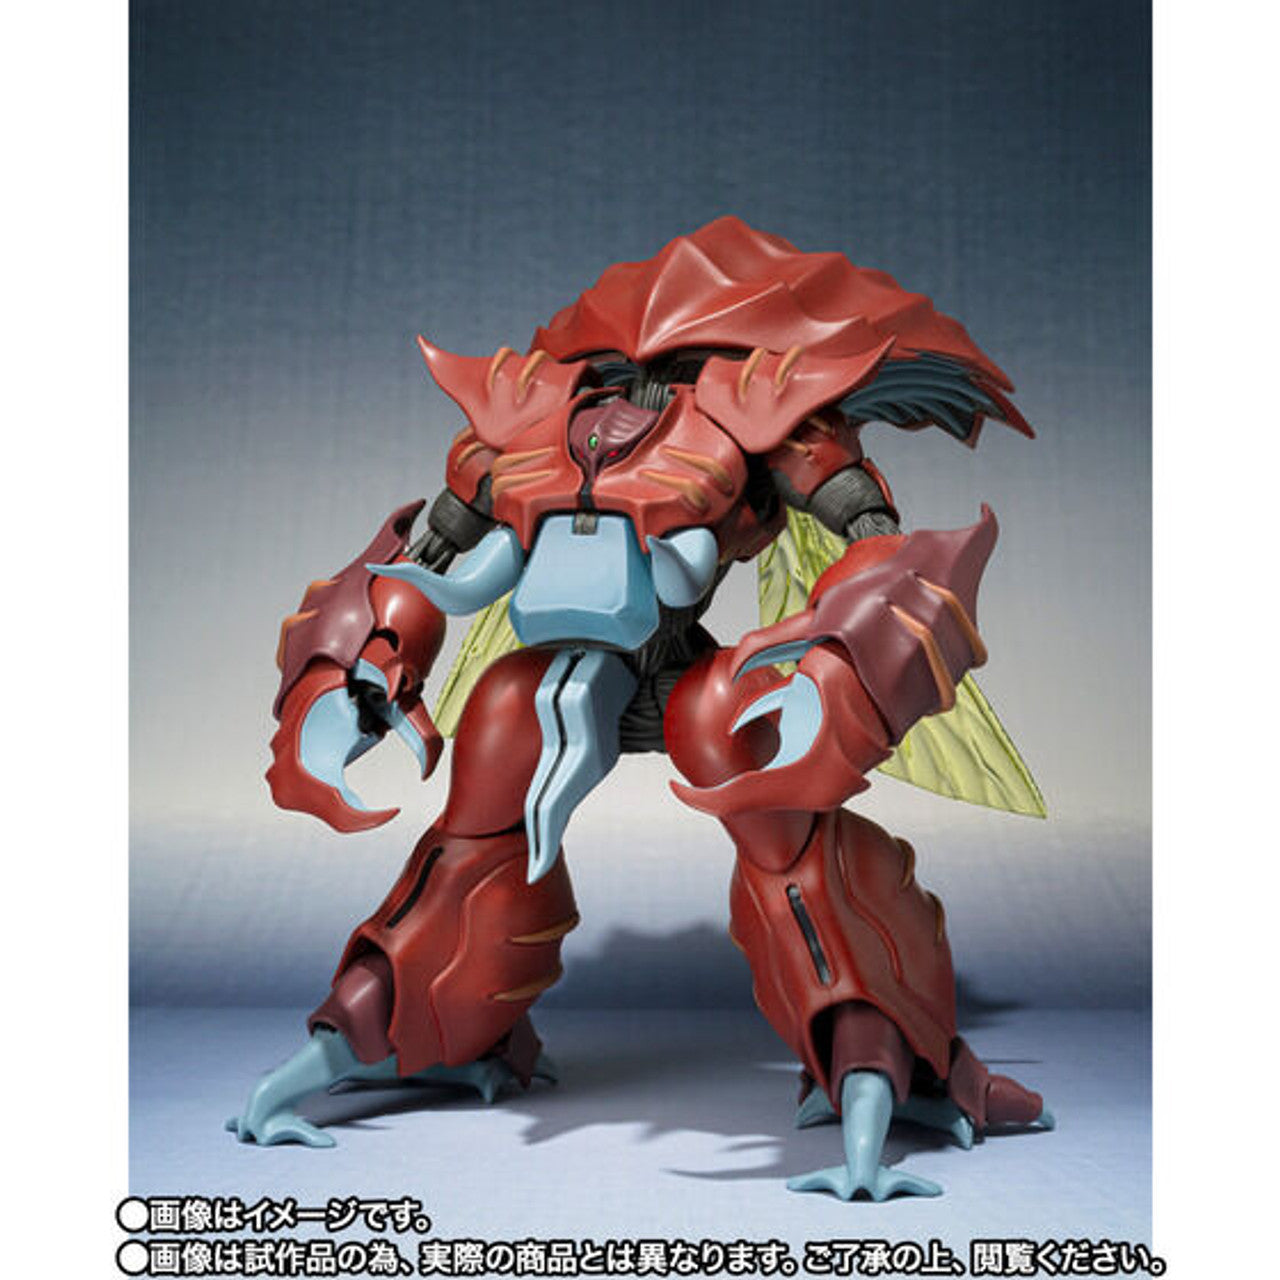 Gigantic Series Dunbine (Completed) - HobbySearch Anime Robot/SFX Store